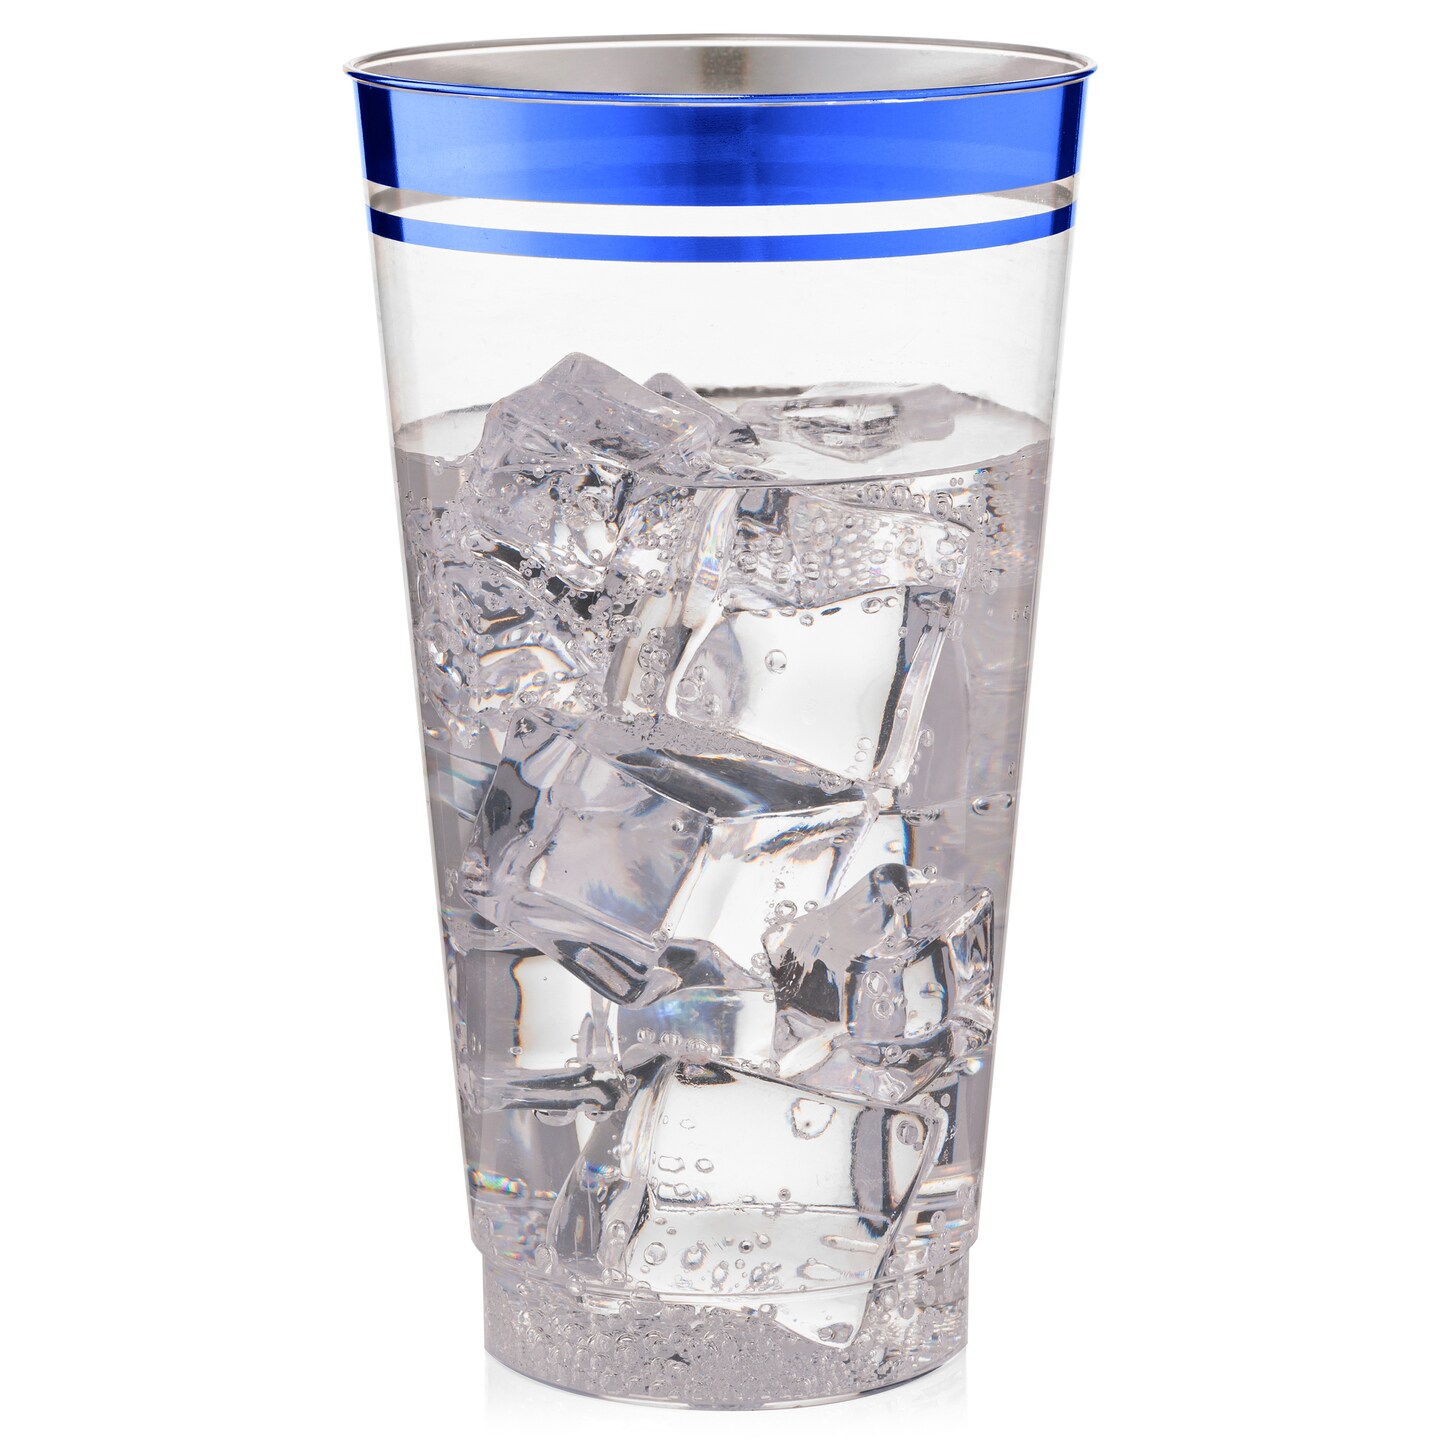 100 Pk 16 oz Clear Plastic Cups  Blue Rimmed Disposable Cups